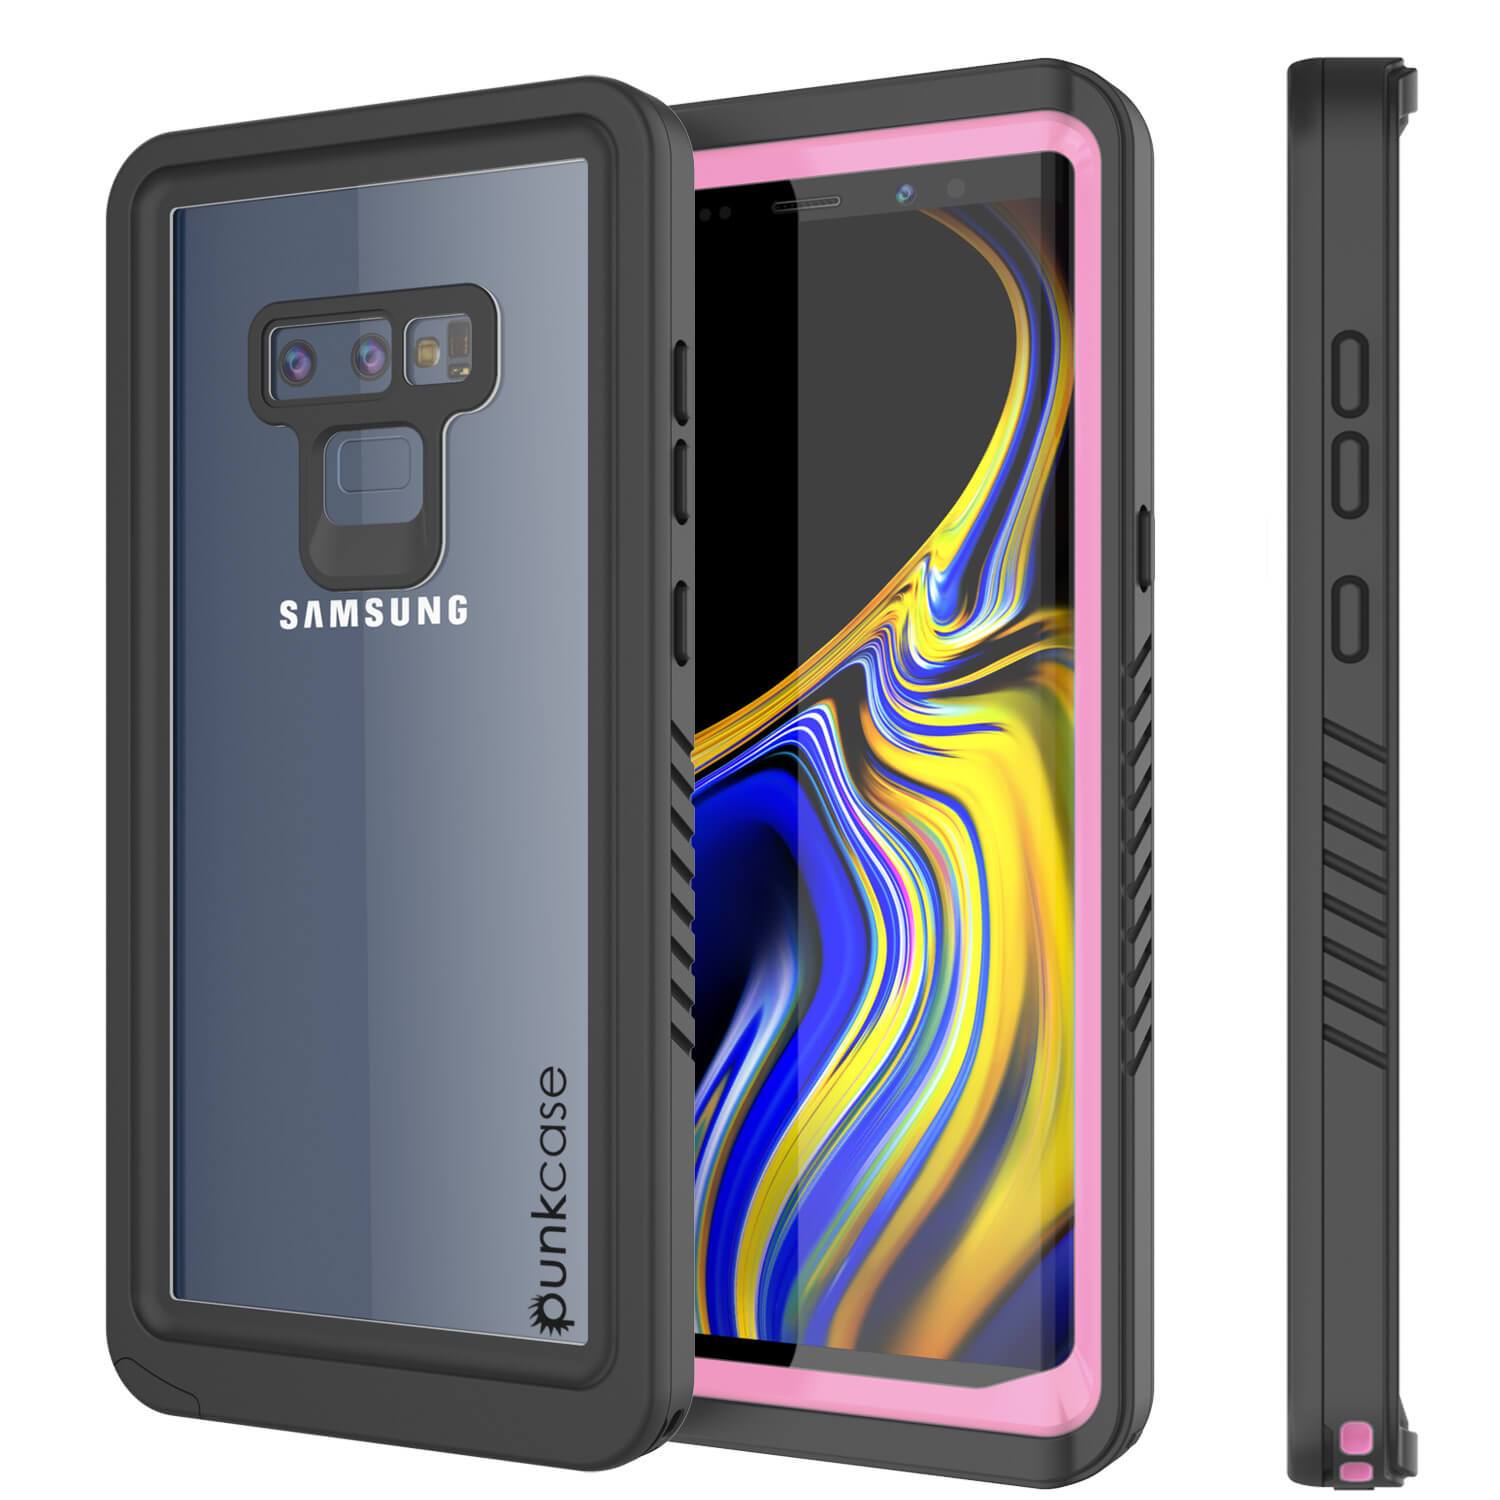 Galaxy Note 9 Case, Punkcase [Extreme Series] Armor Cover W/ Built In Screen Protector [Pink]